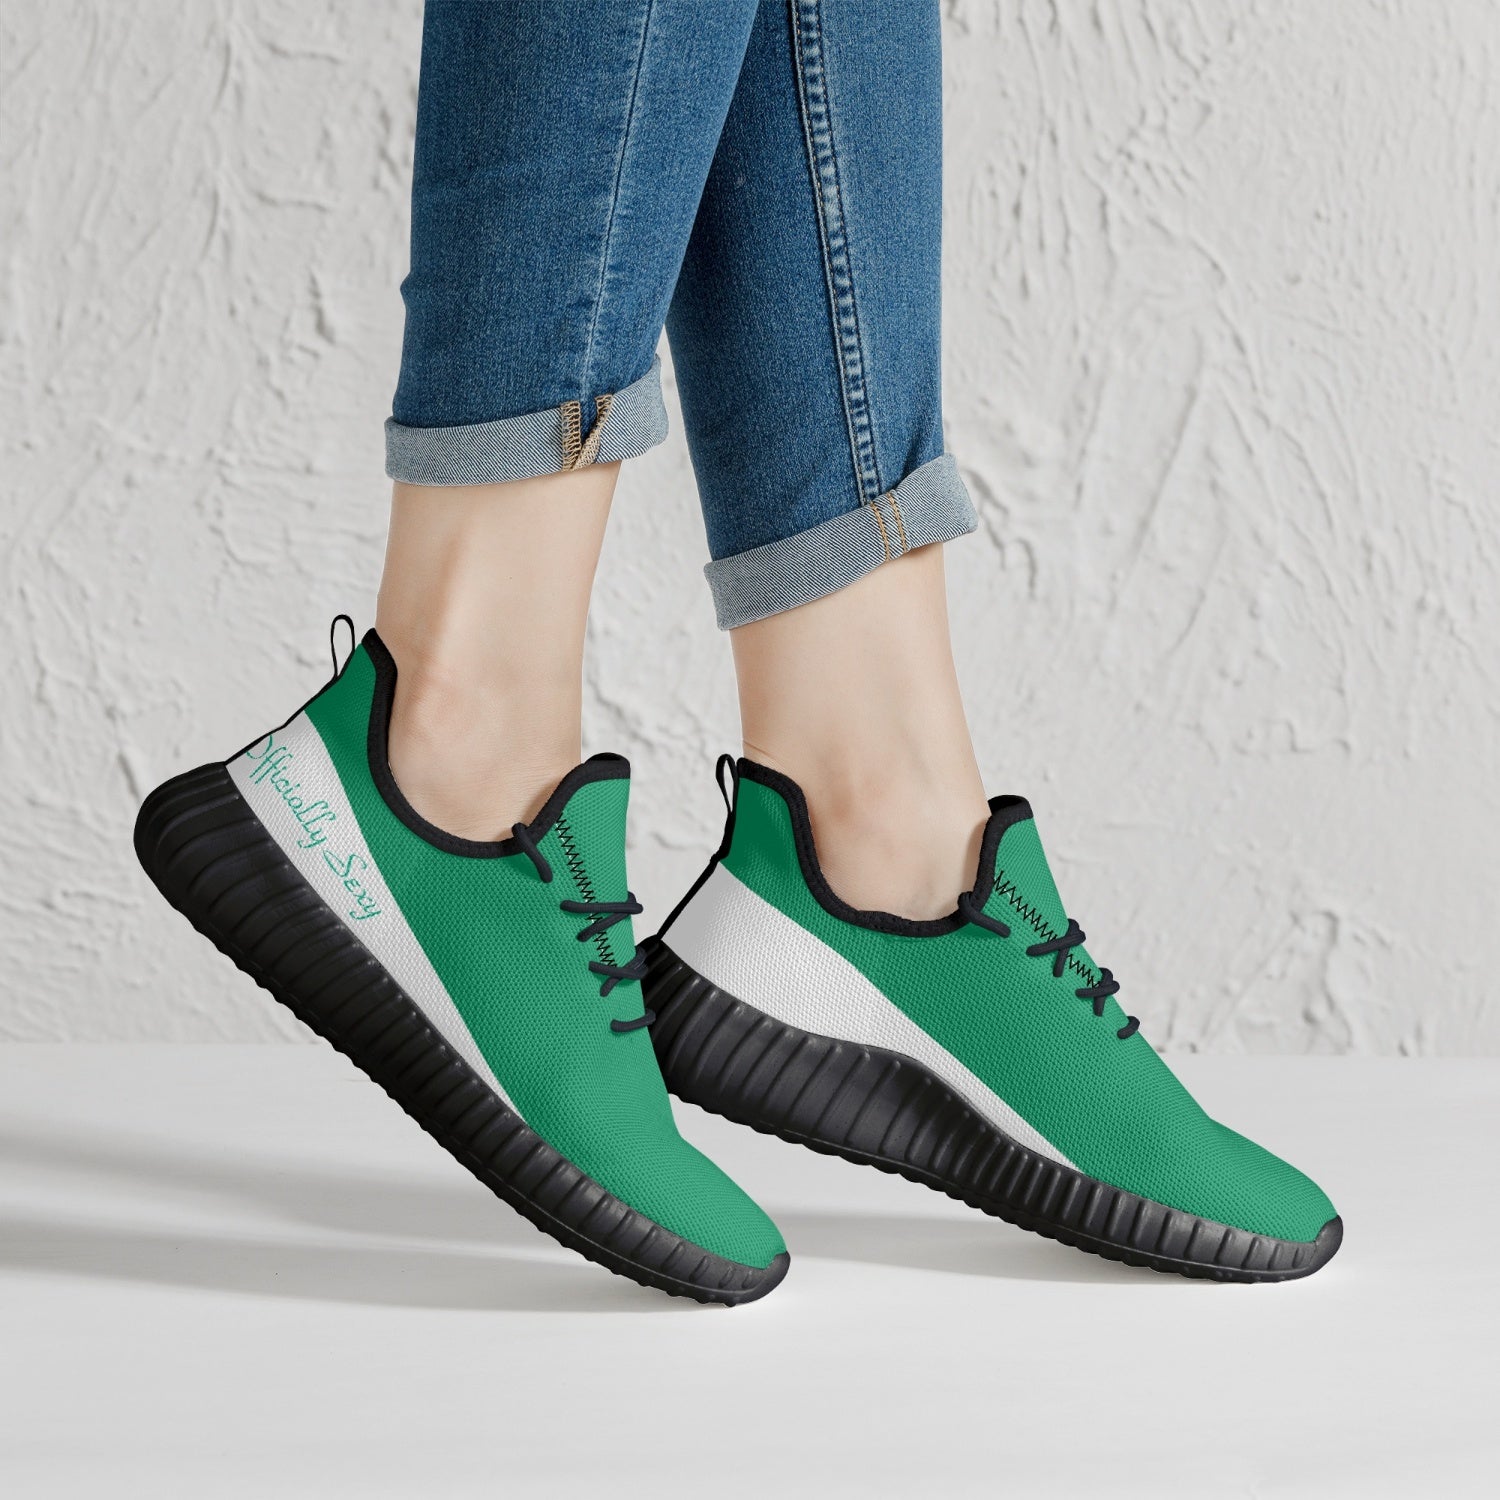 Officially Sexy Mint & White Laser Mesh Knit Sneakers - With White or Black Sole